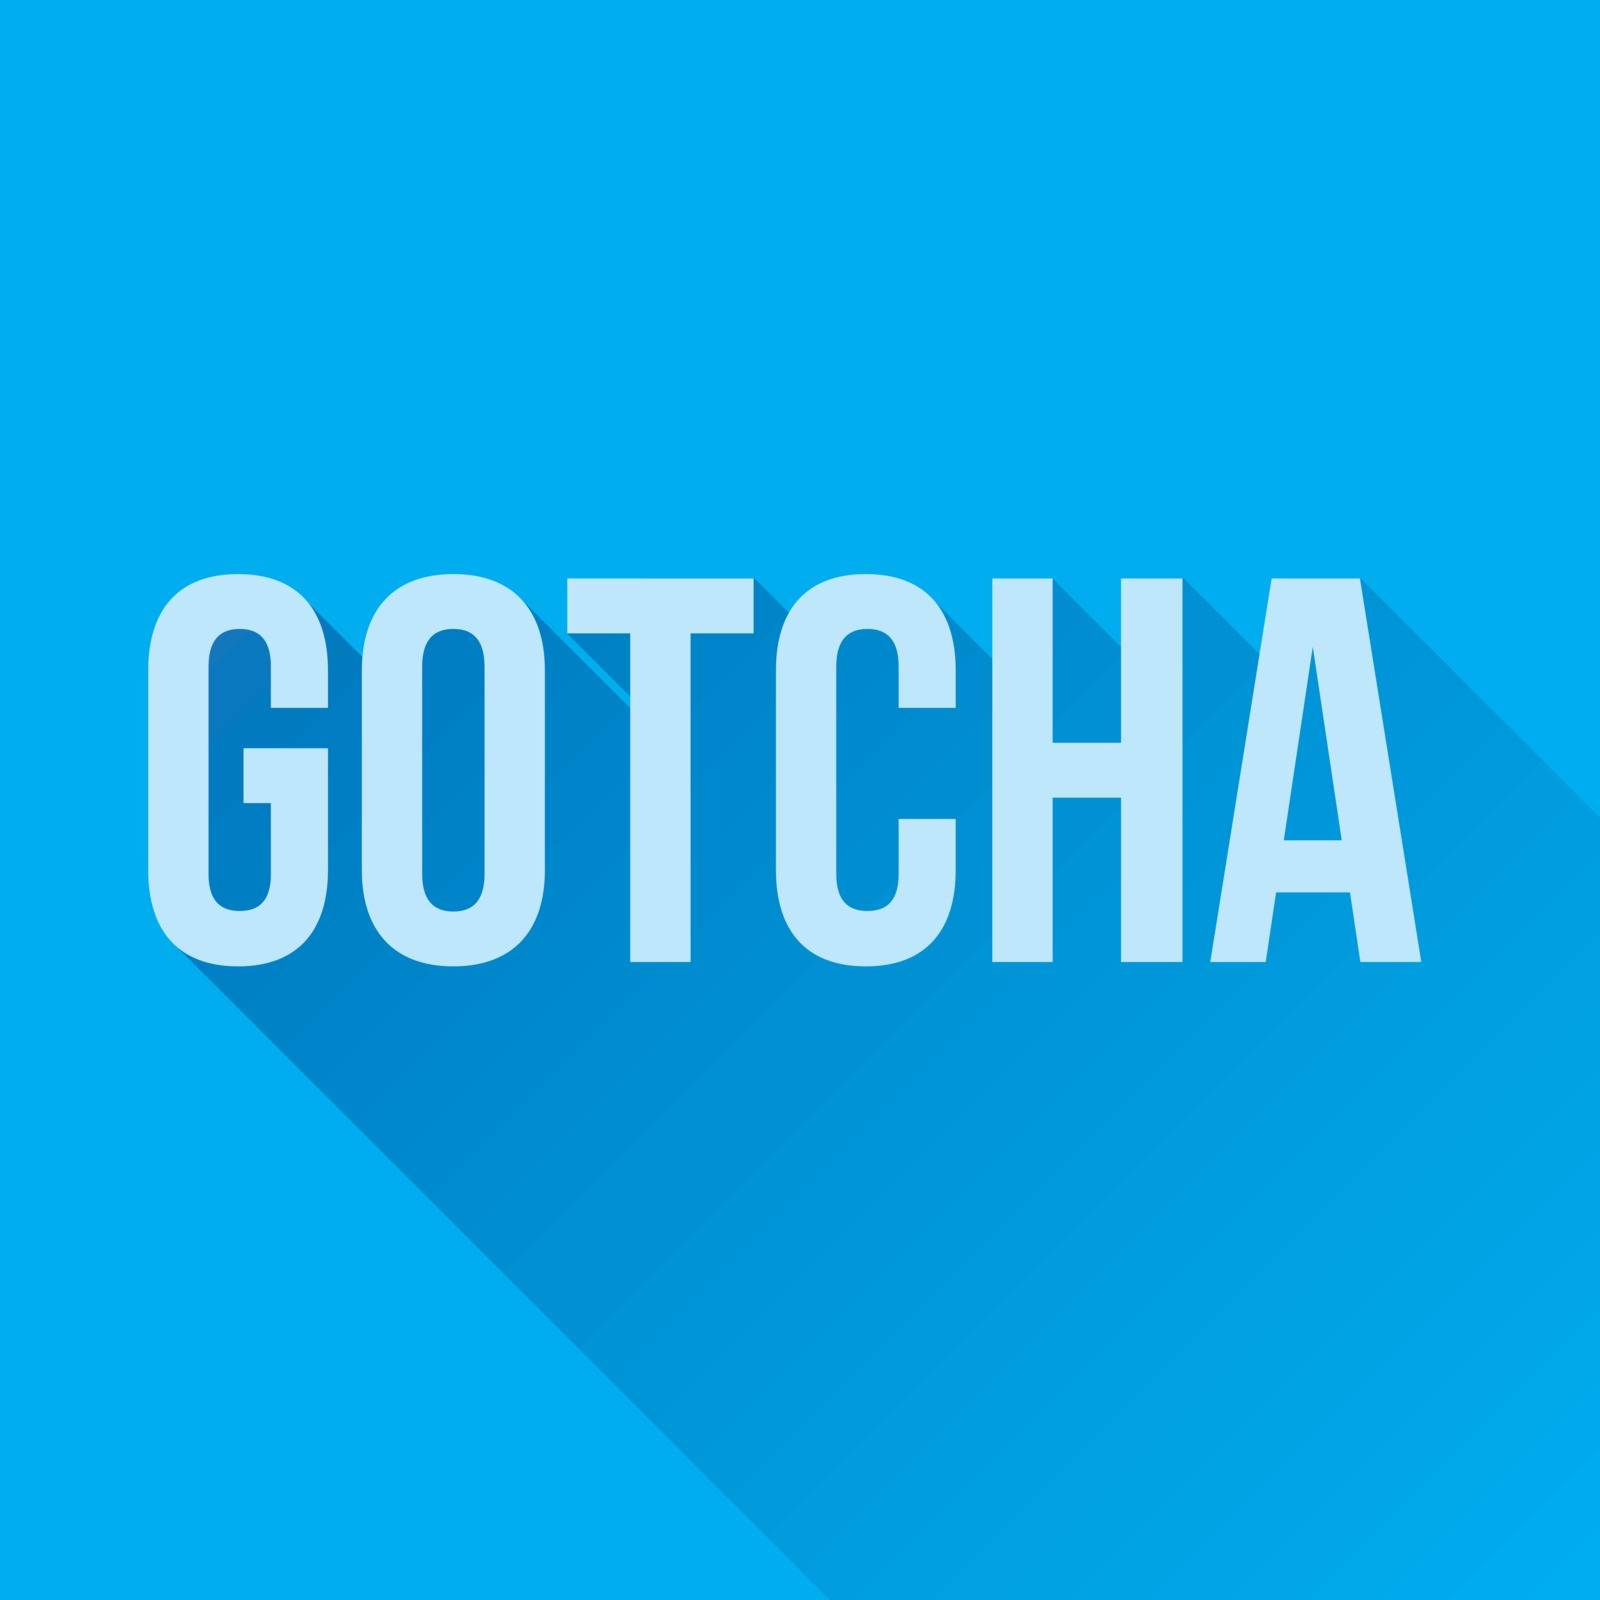 GOTCHA word graphic with a blue background and longshadow.